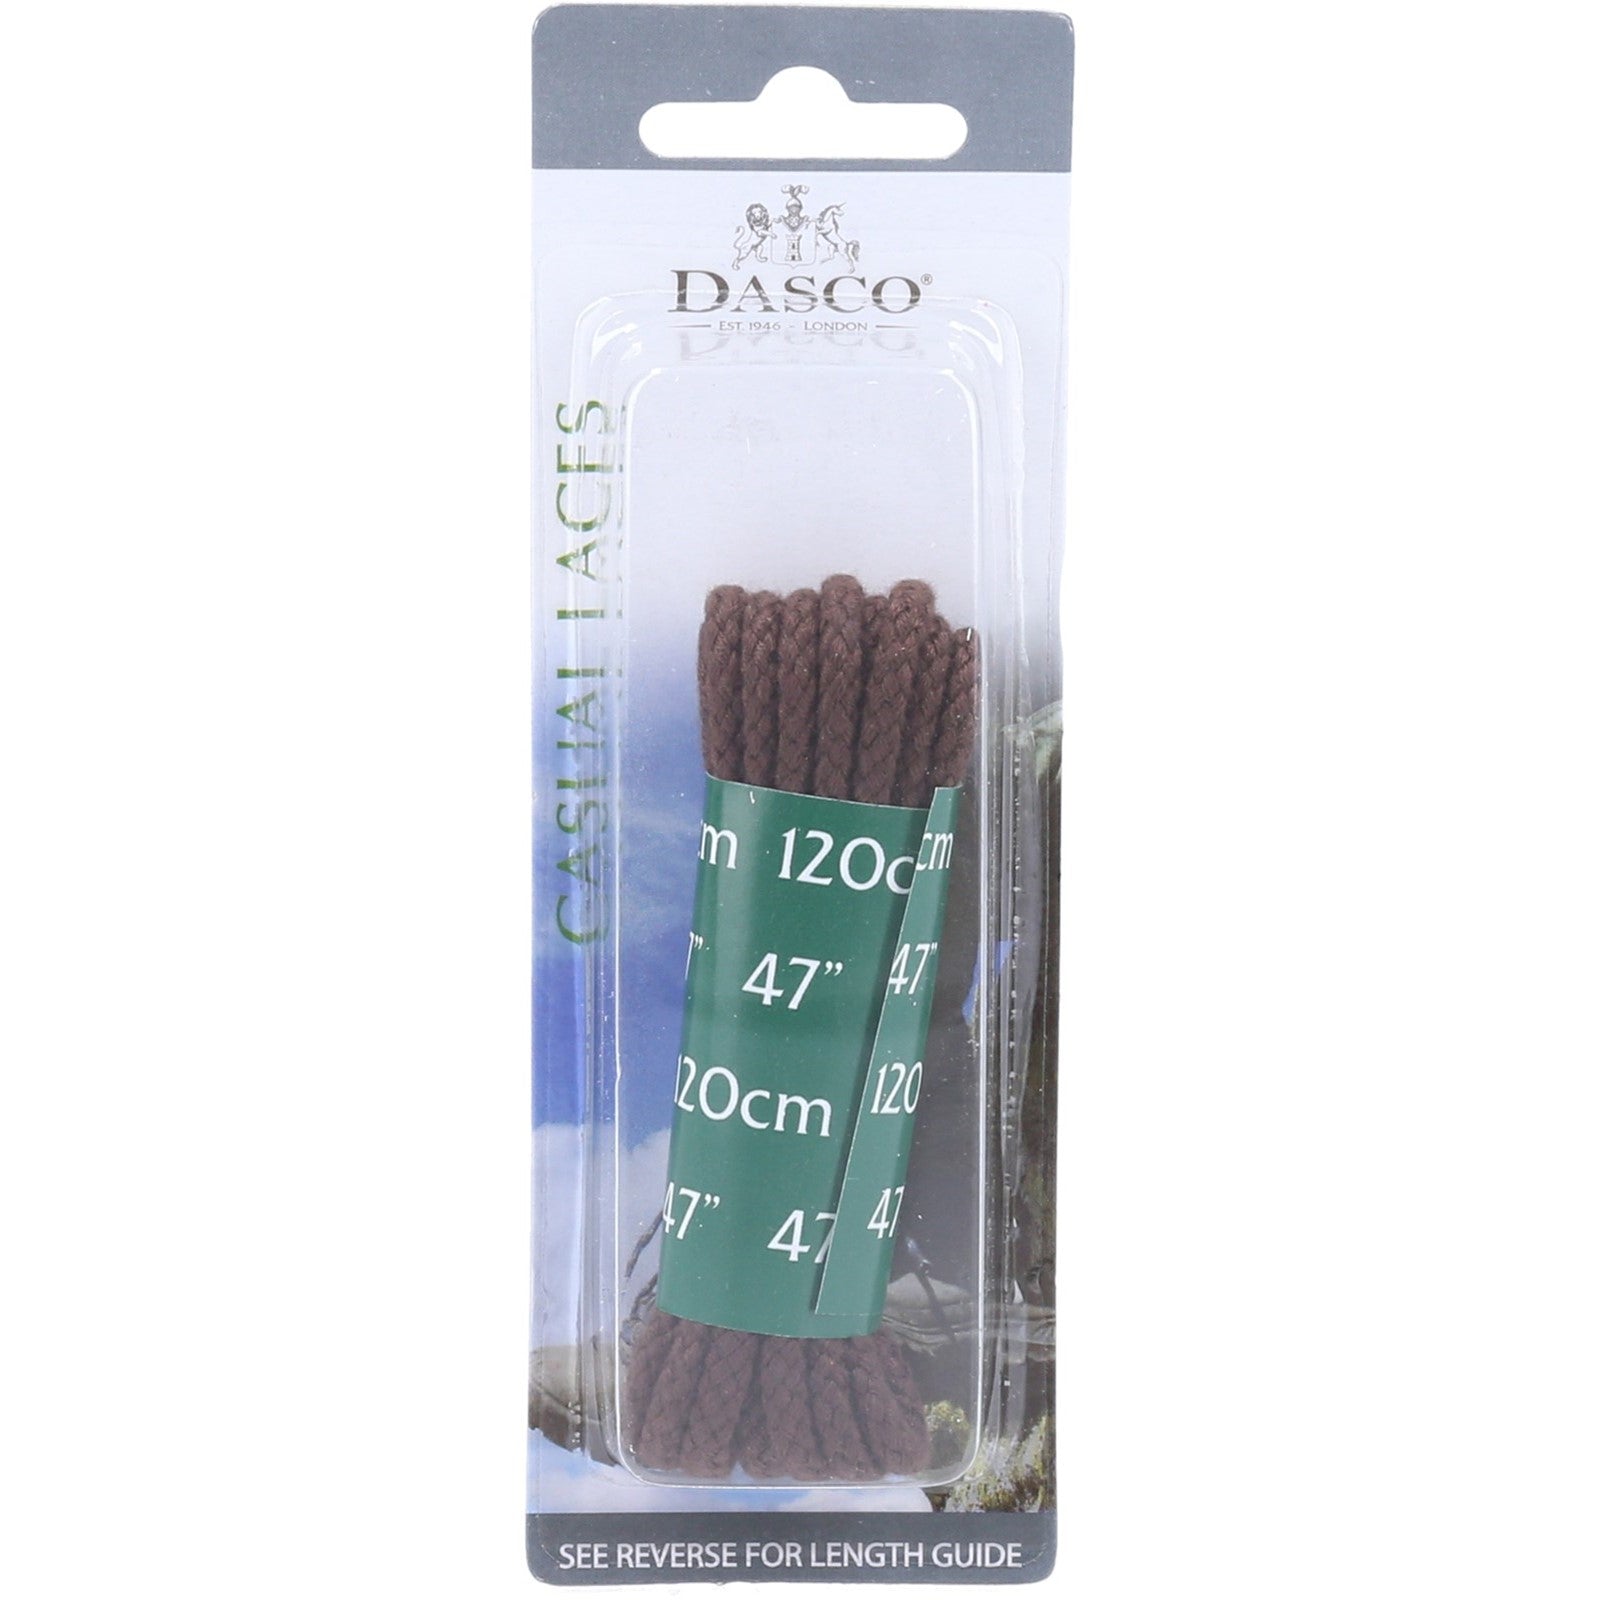 Dasco 75cm Chunky Cord Lace 6 Pack